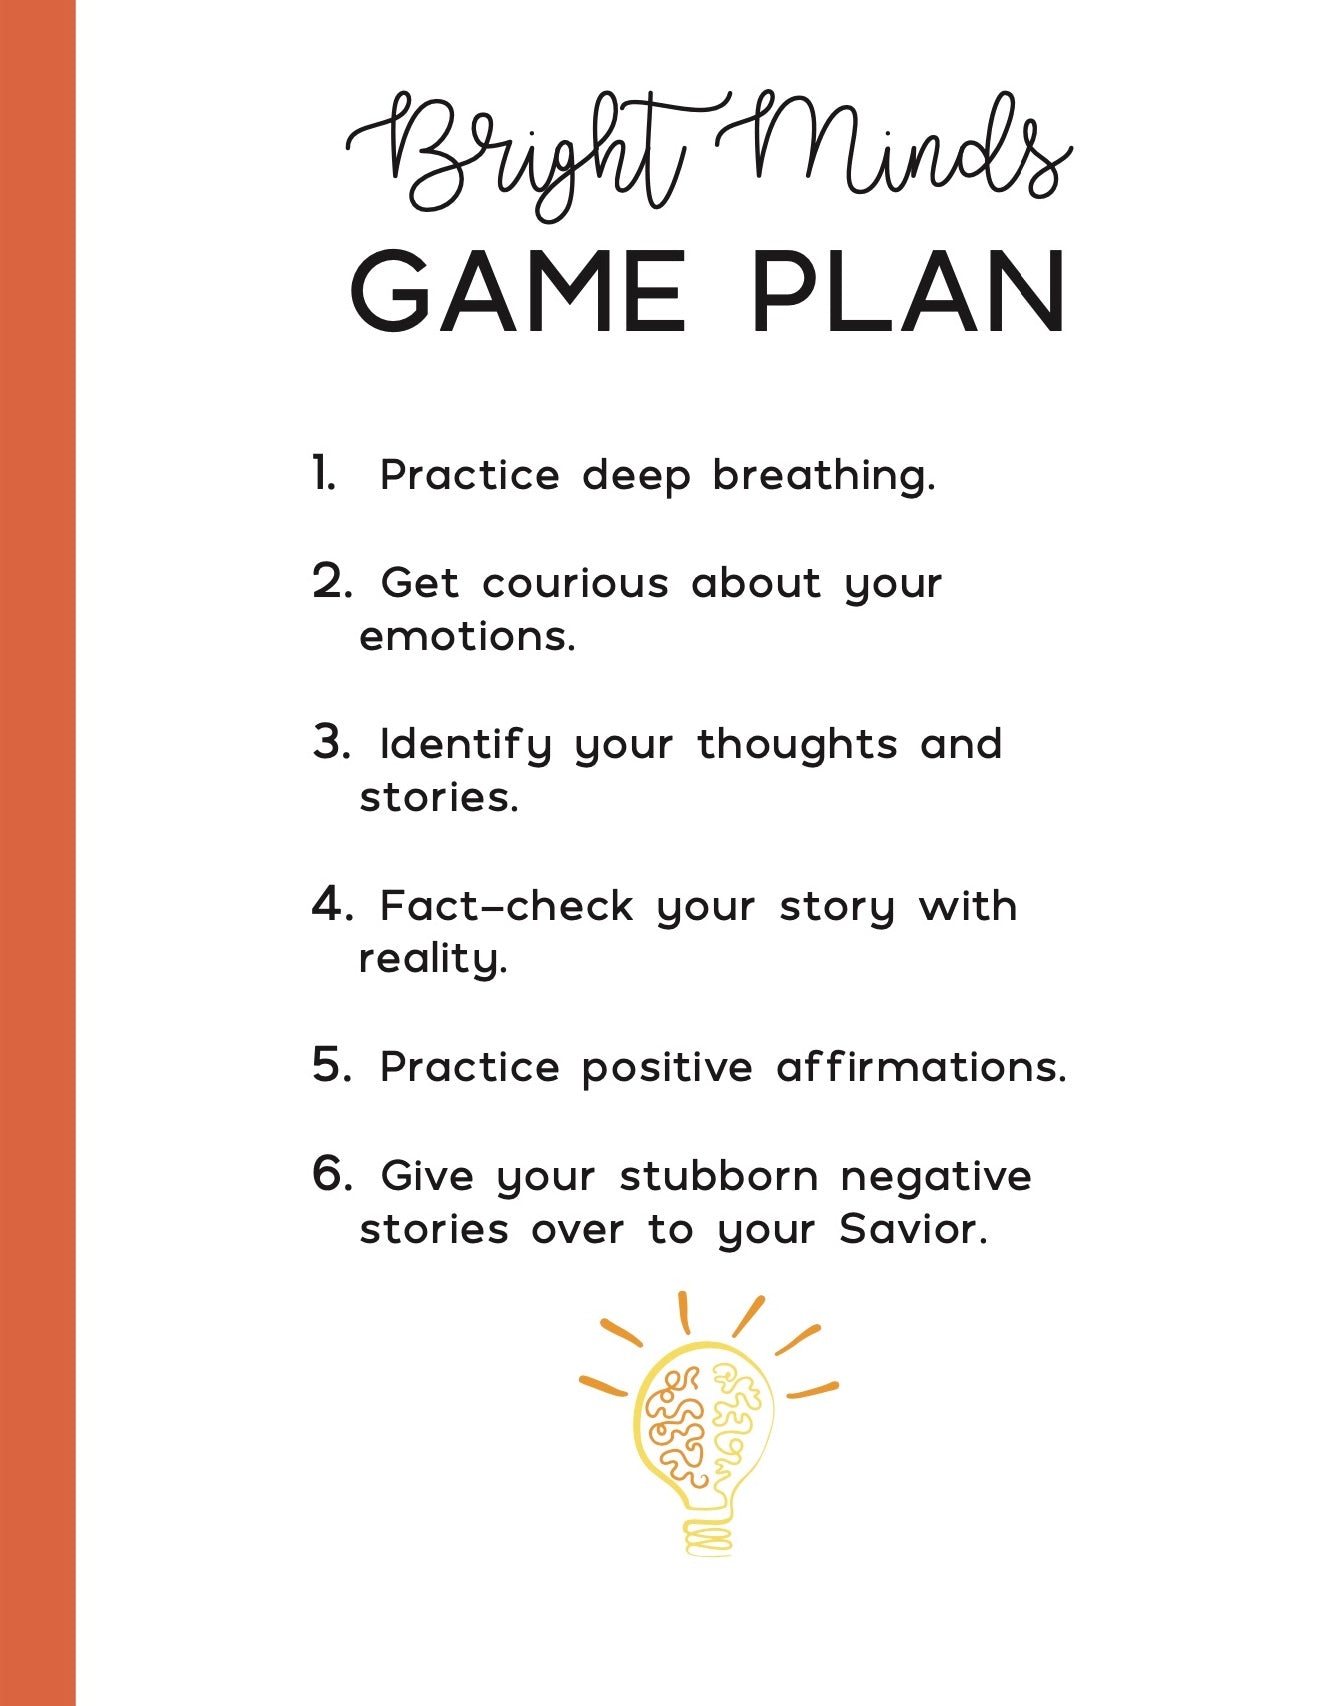 Bright Minds Game Plan